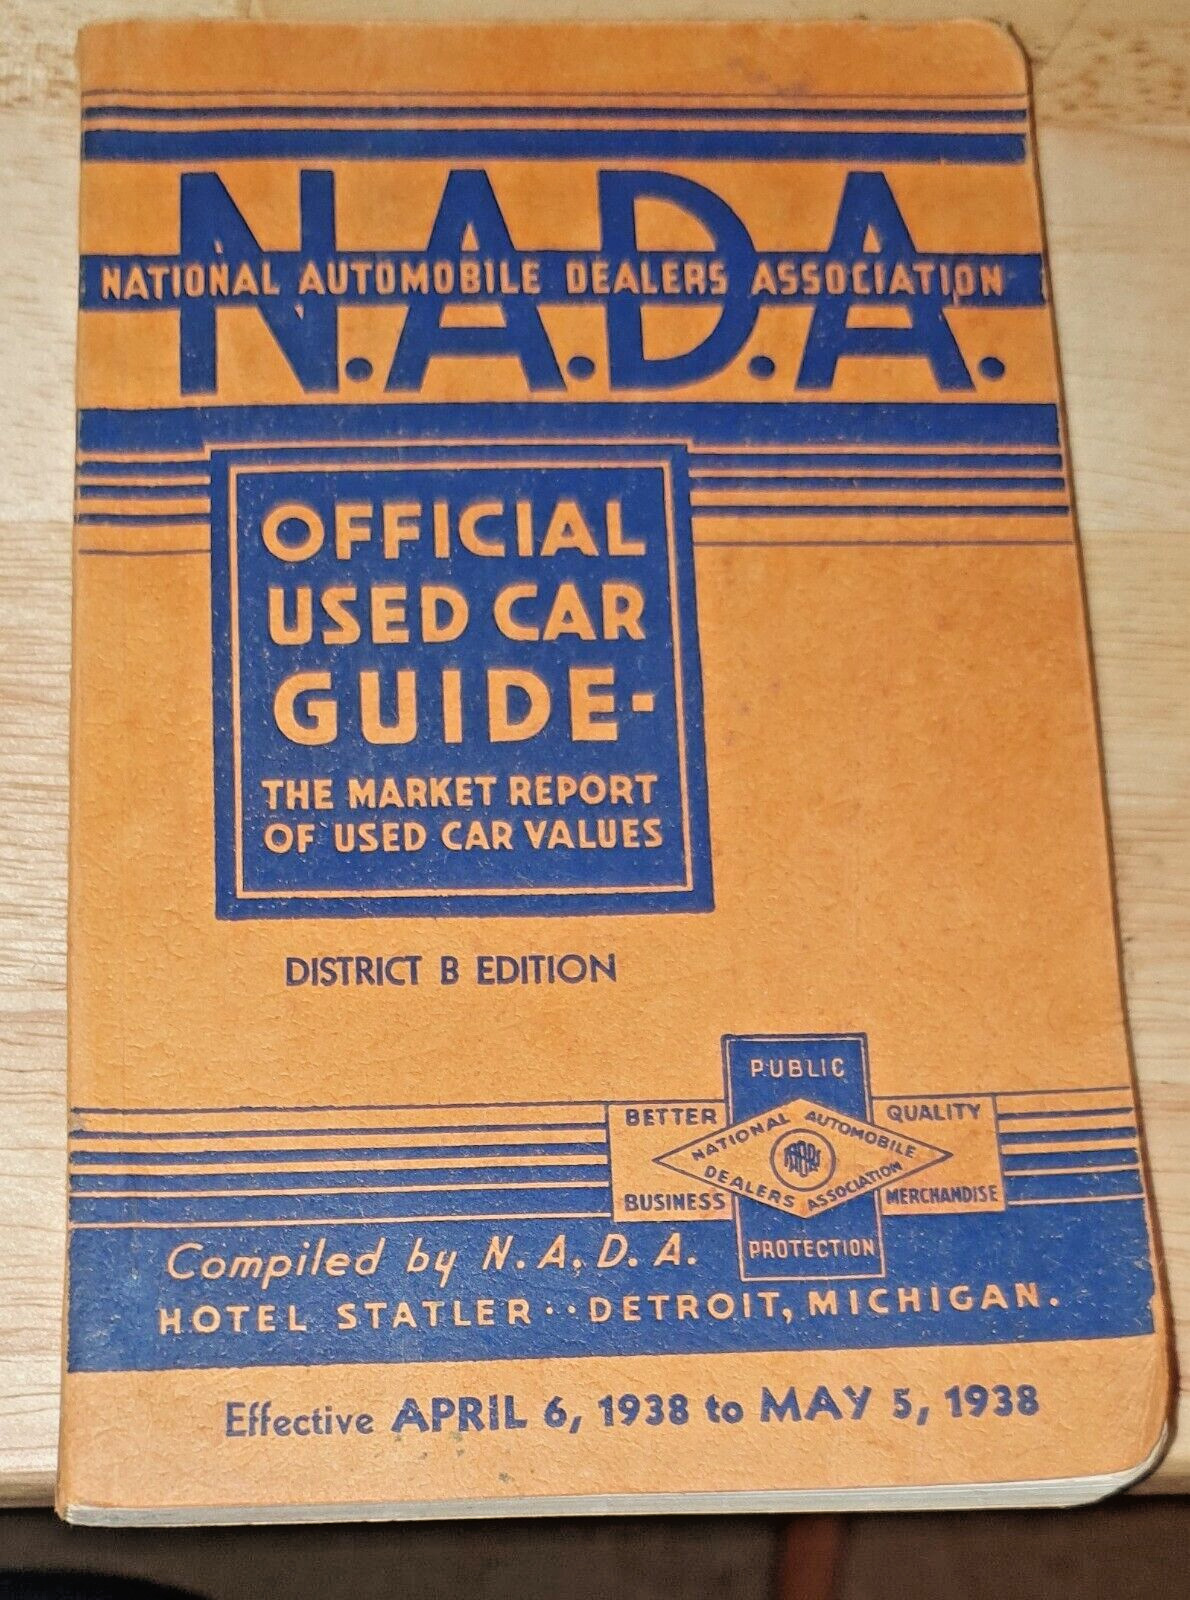 1938 NADA OFFICIAL USED CAR GUIDE - LJ